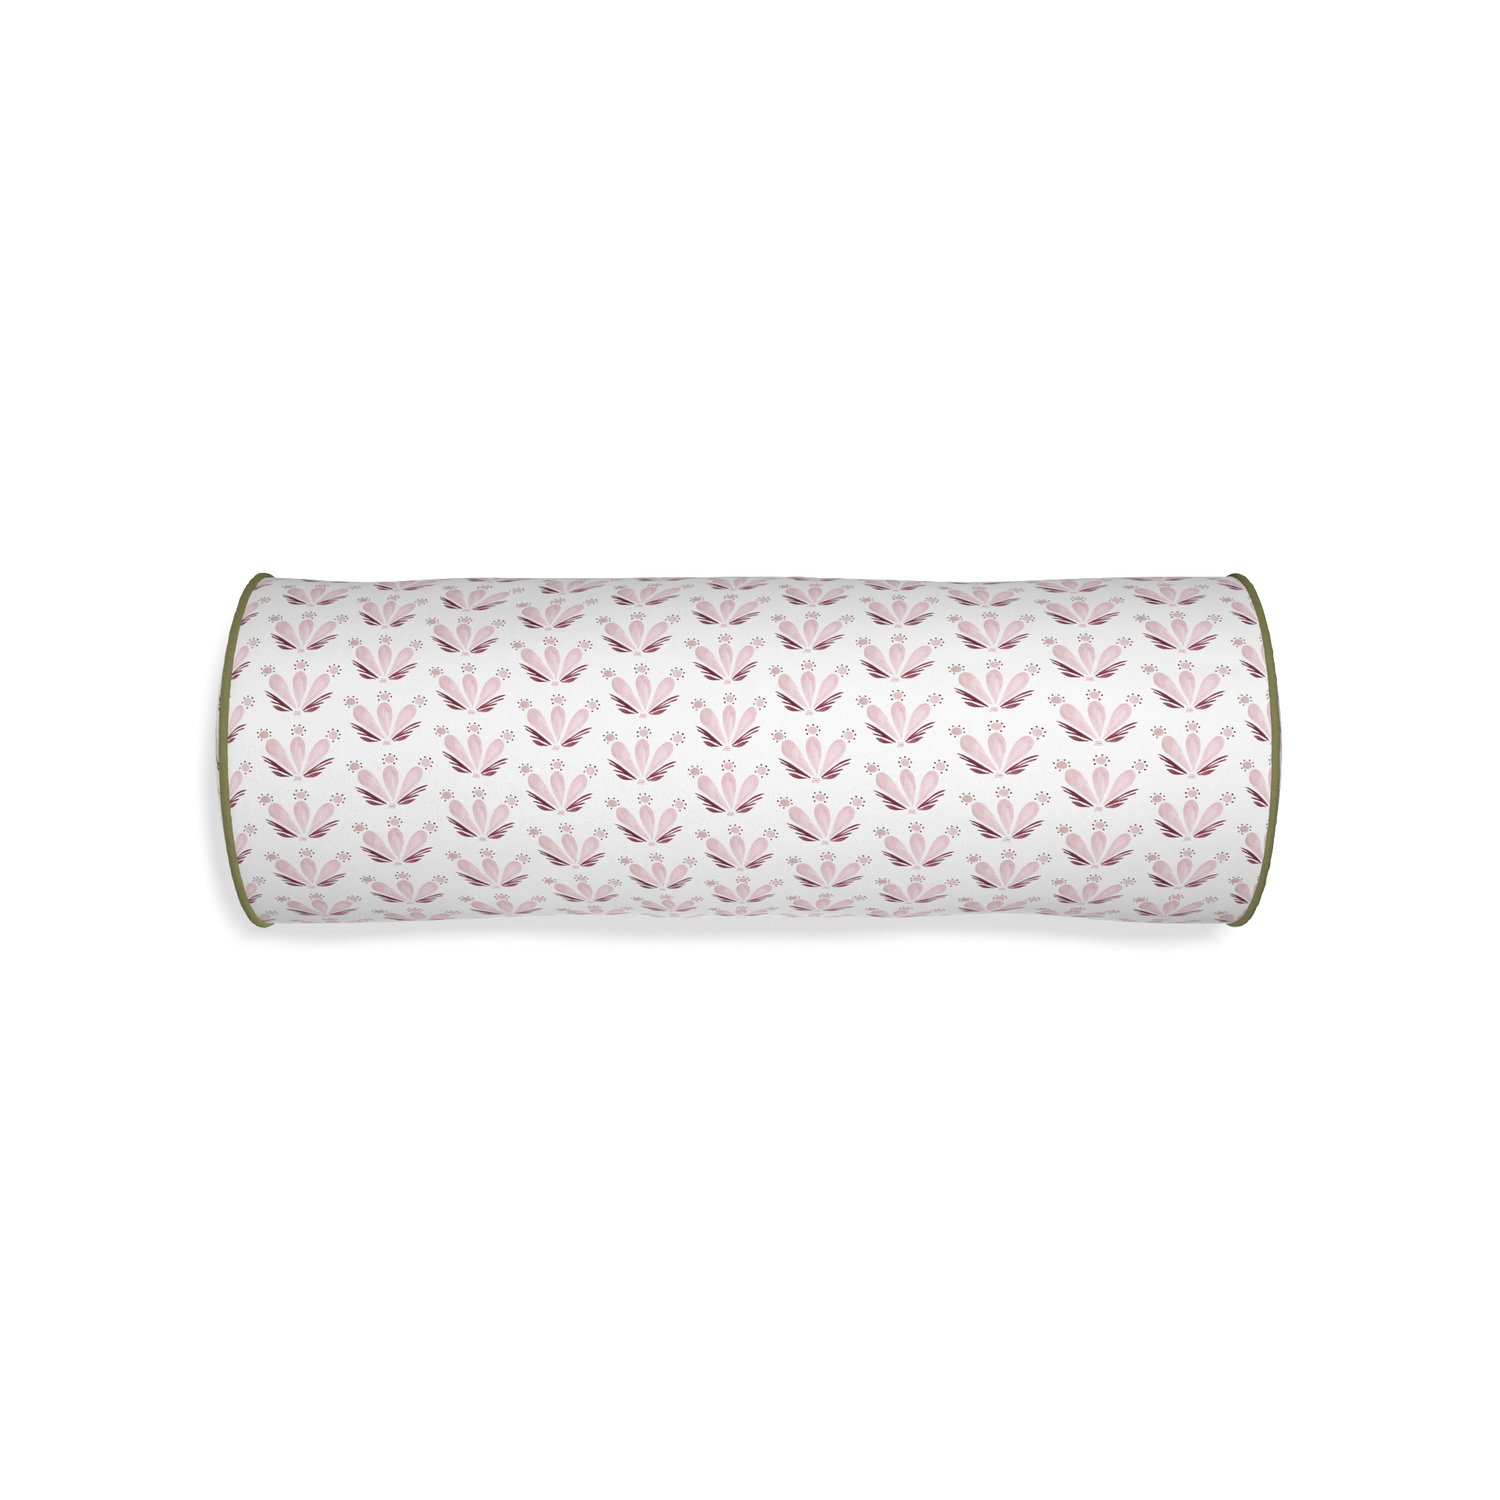 Bolster serena pink custom pink & burgundy drop repeat floralpillow with moss piping on white background